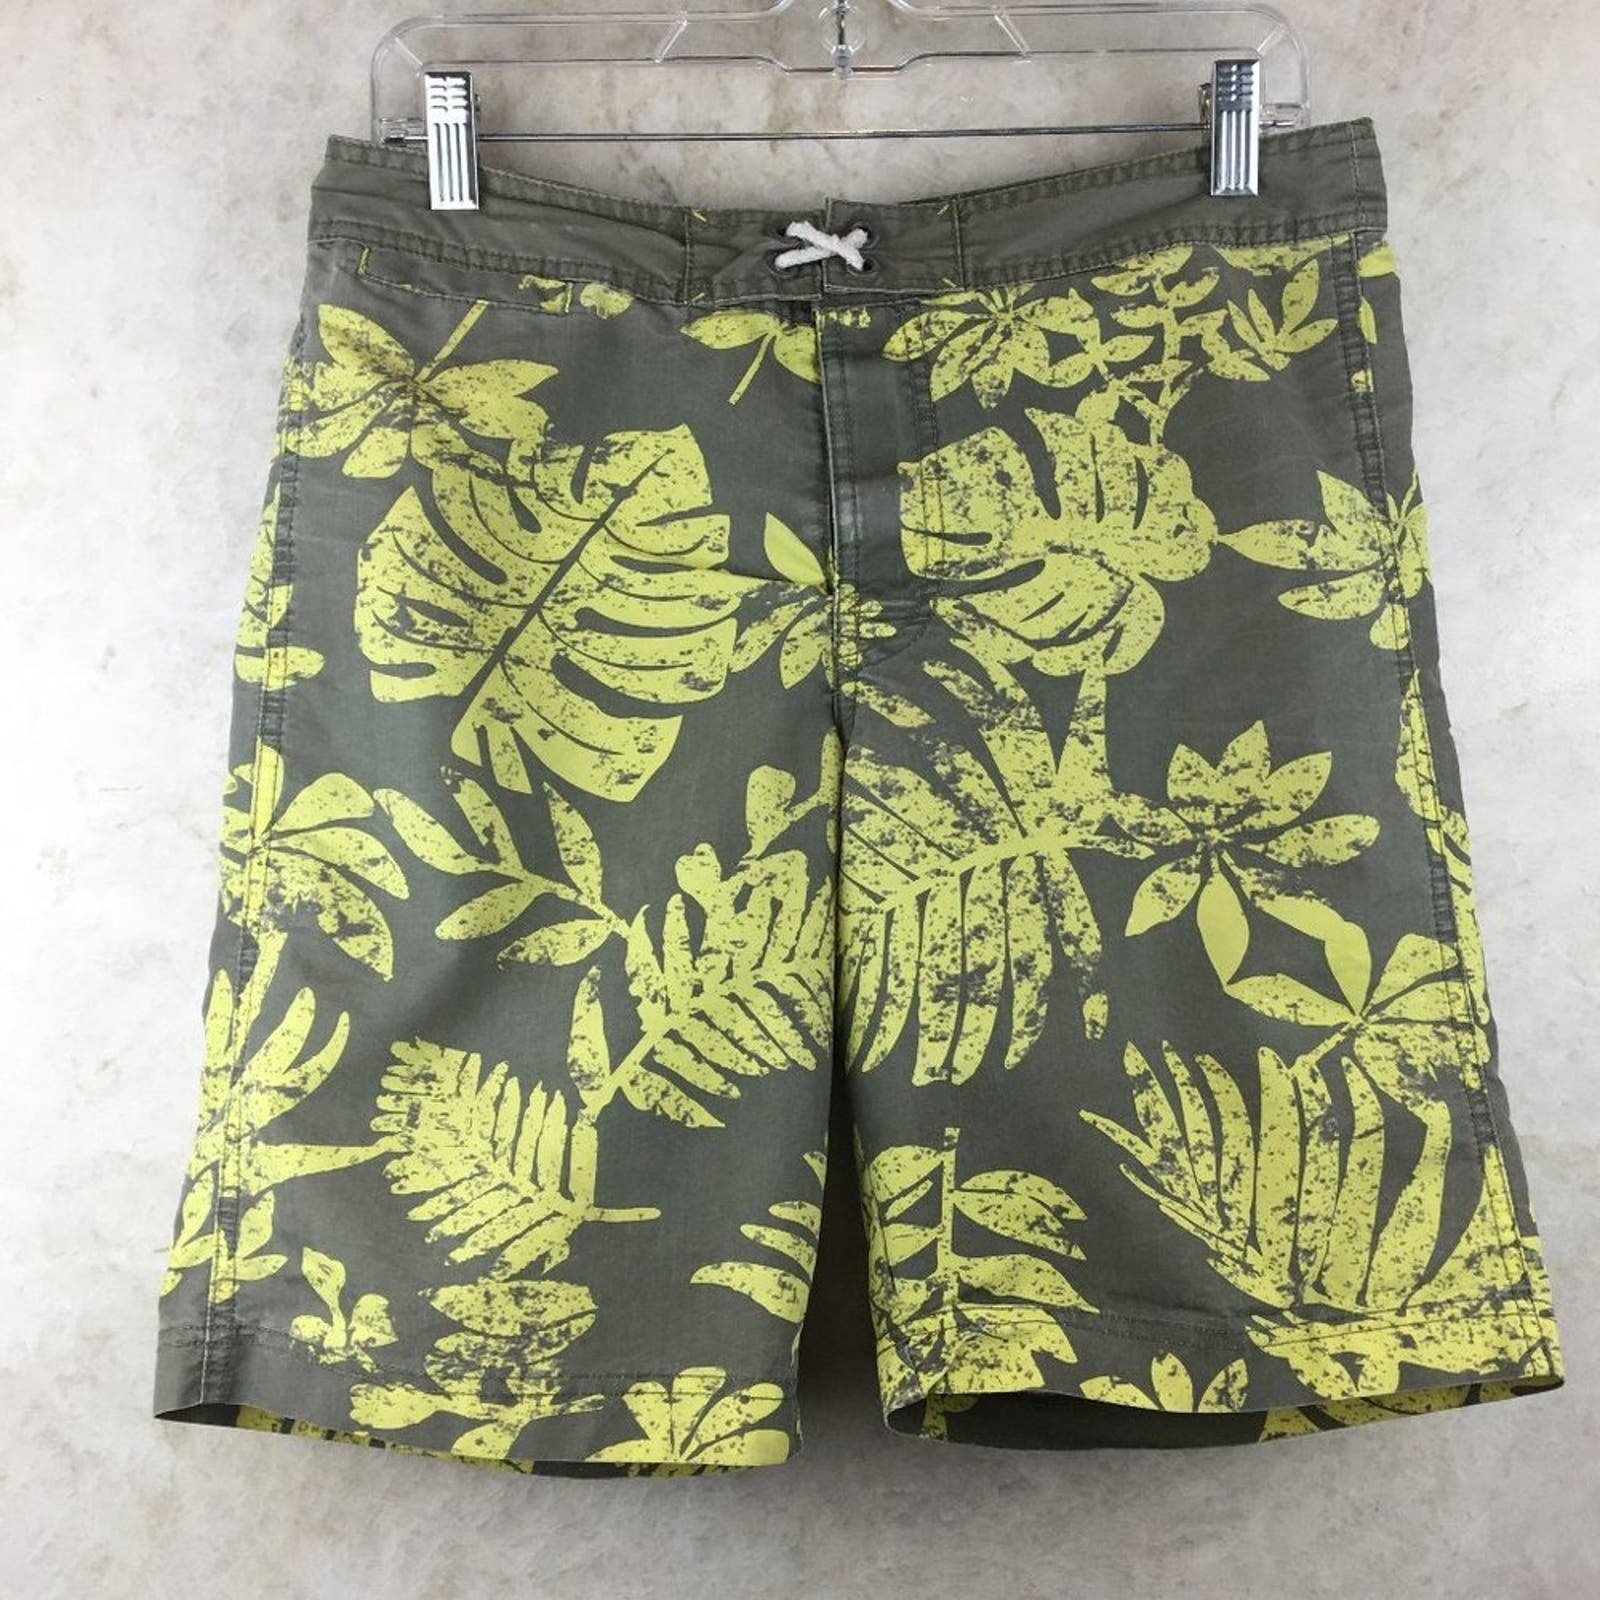 Converse One Star Men´s Lined Swimming Shorts Size 30 4Emy1xUUI